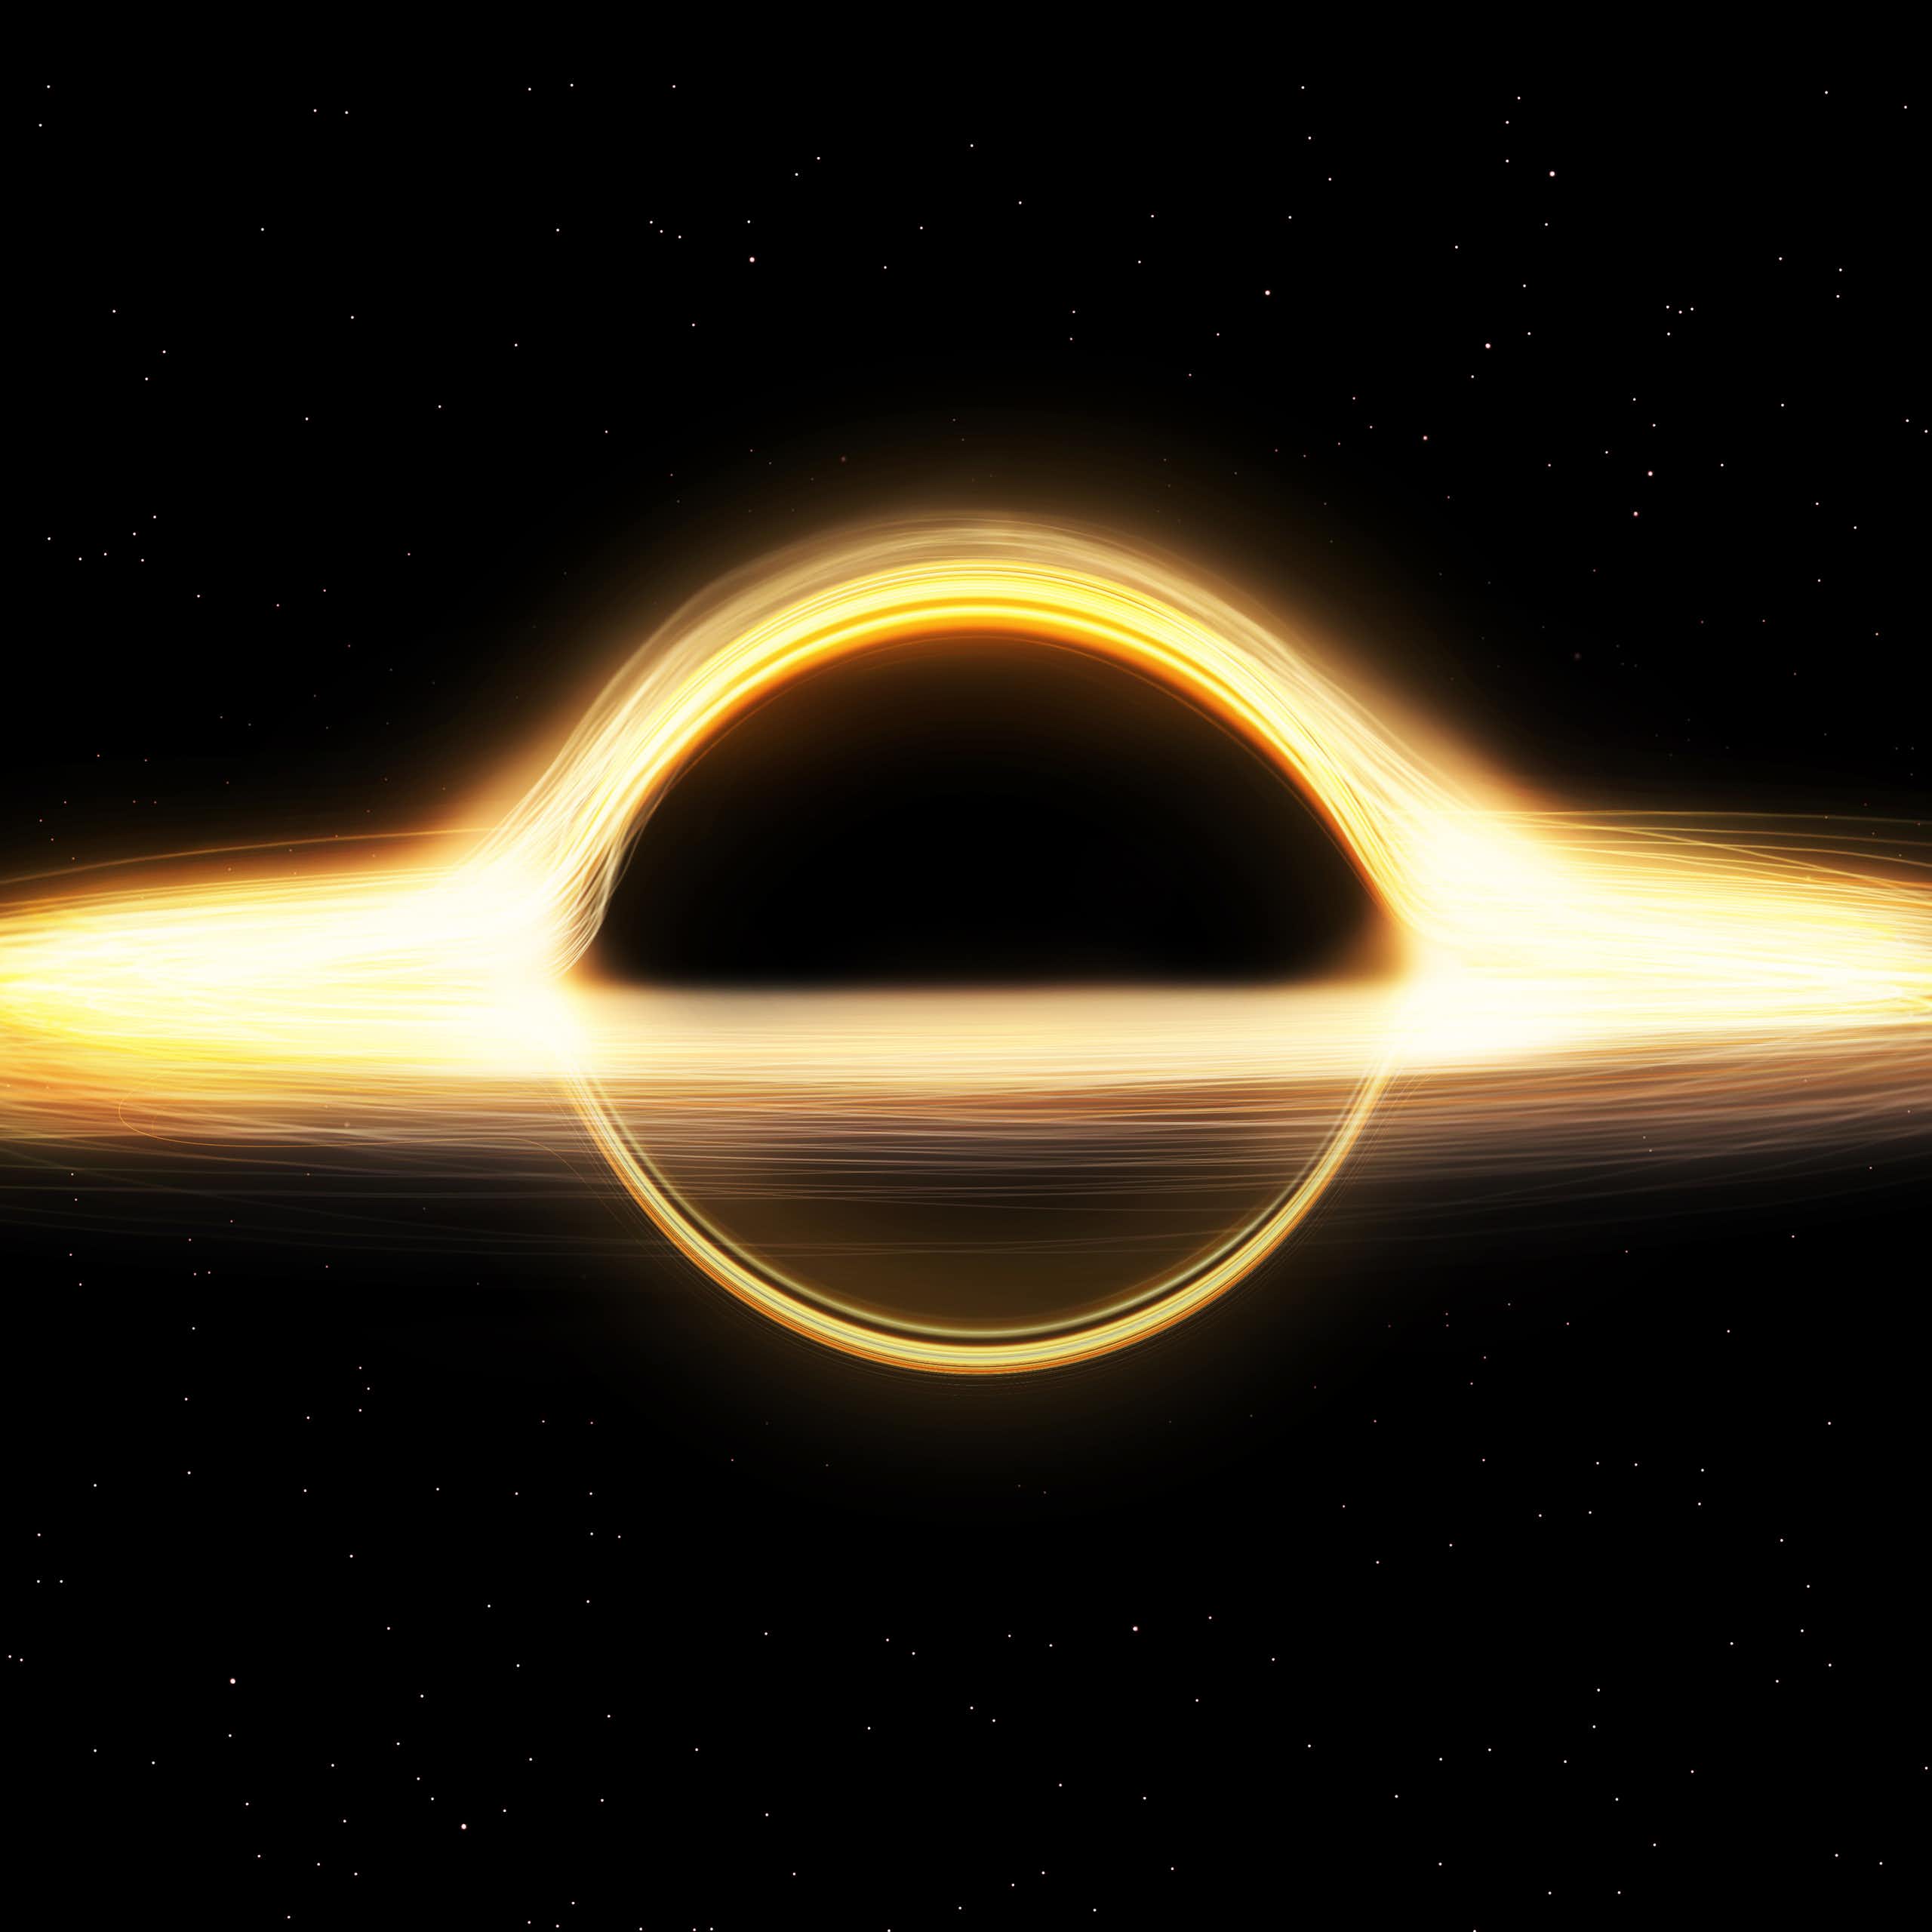 A glowing disk with elongated sides on a black background